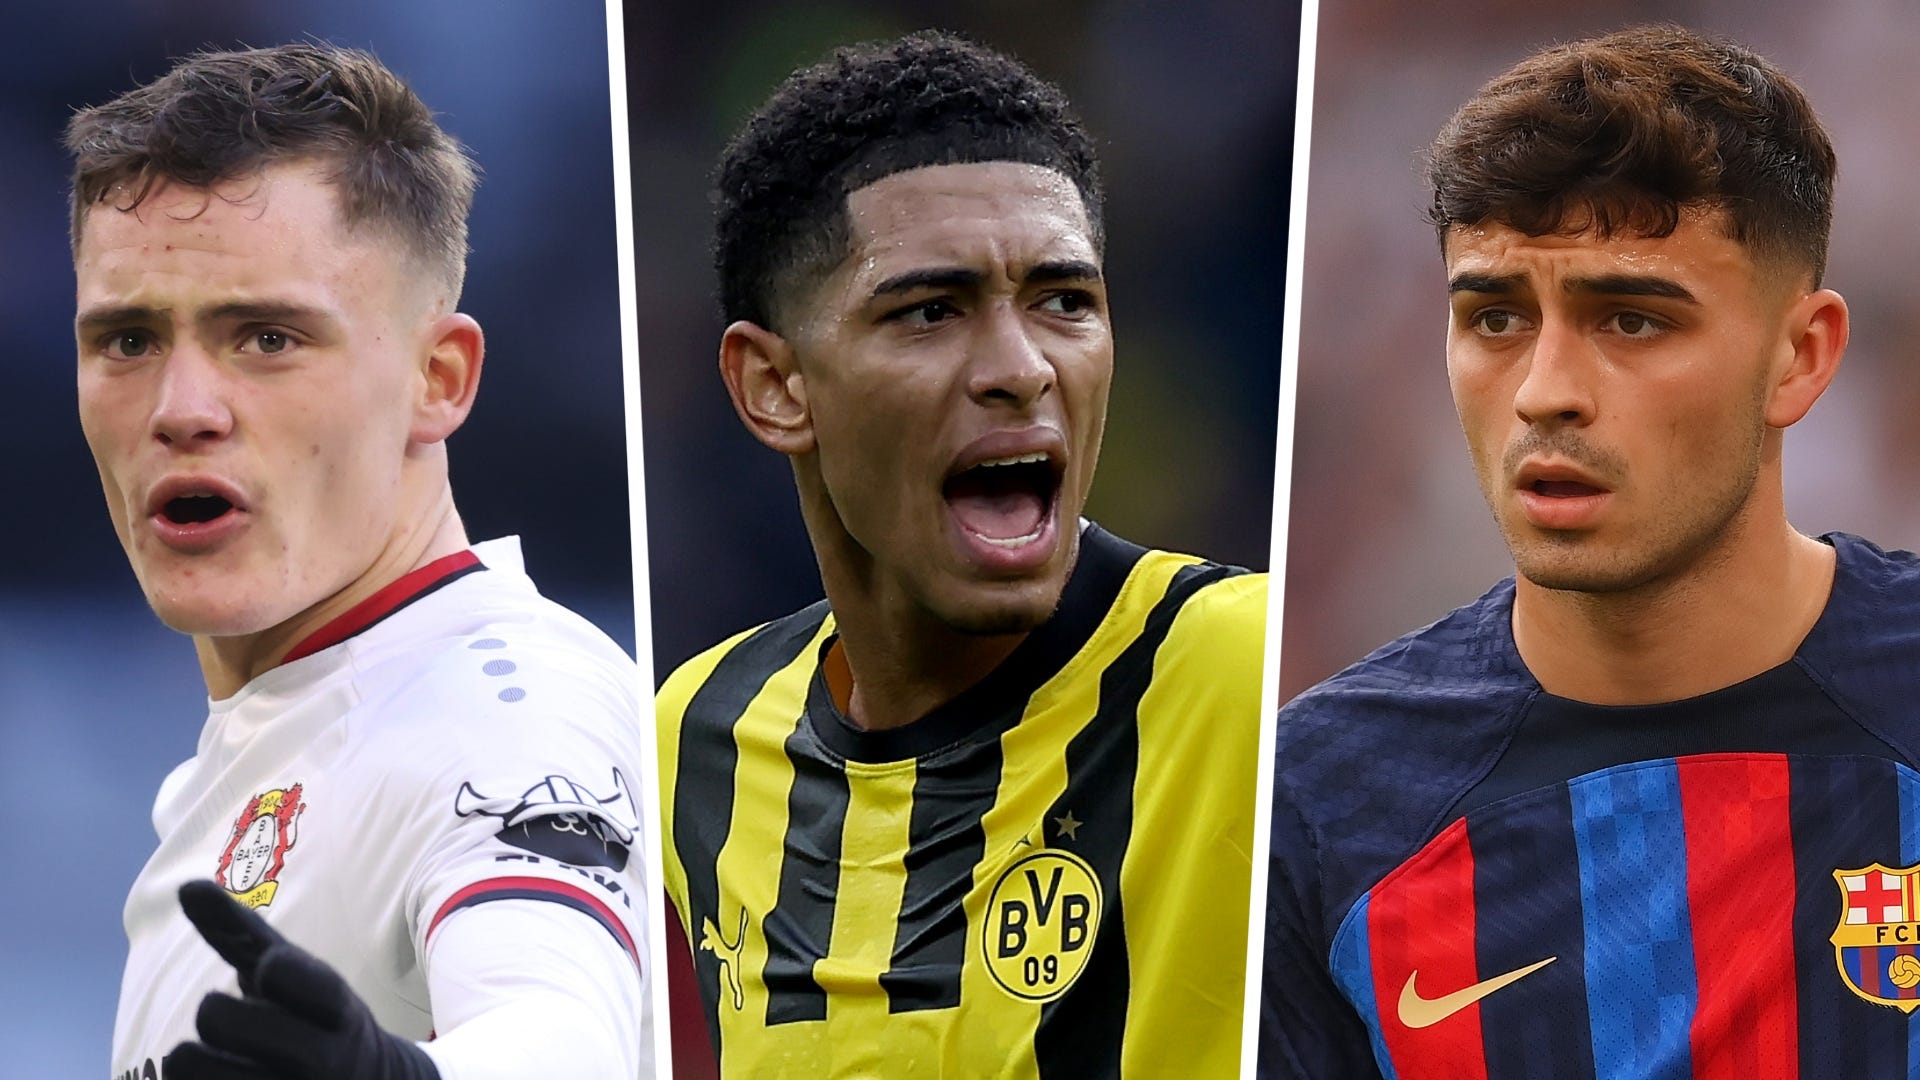 FIFA 23 best young players list reveals the top 50 career mode wonderkids